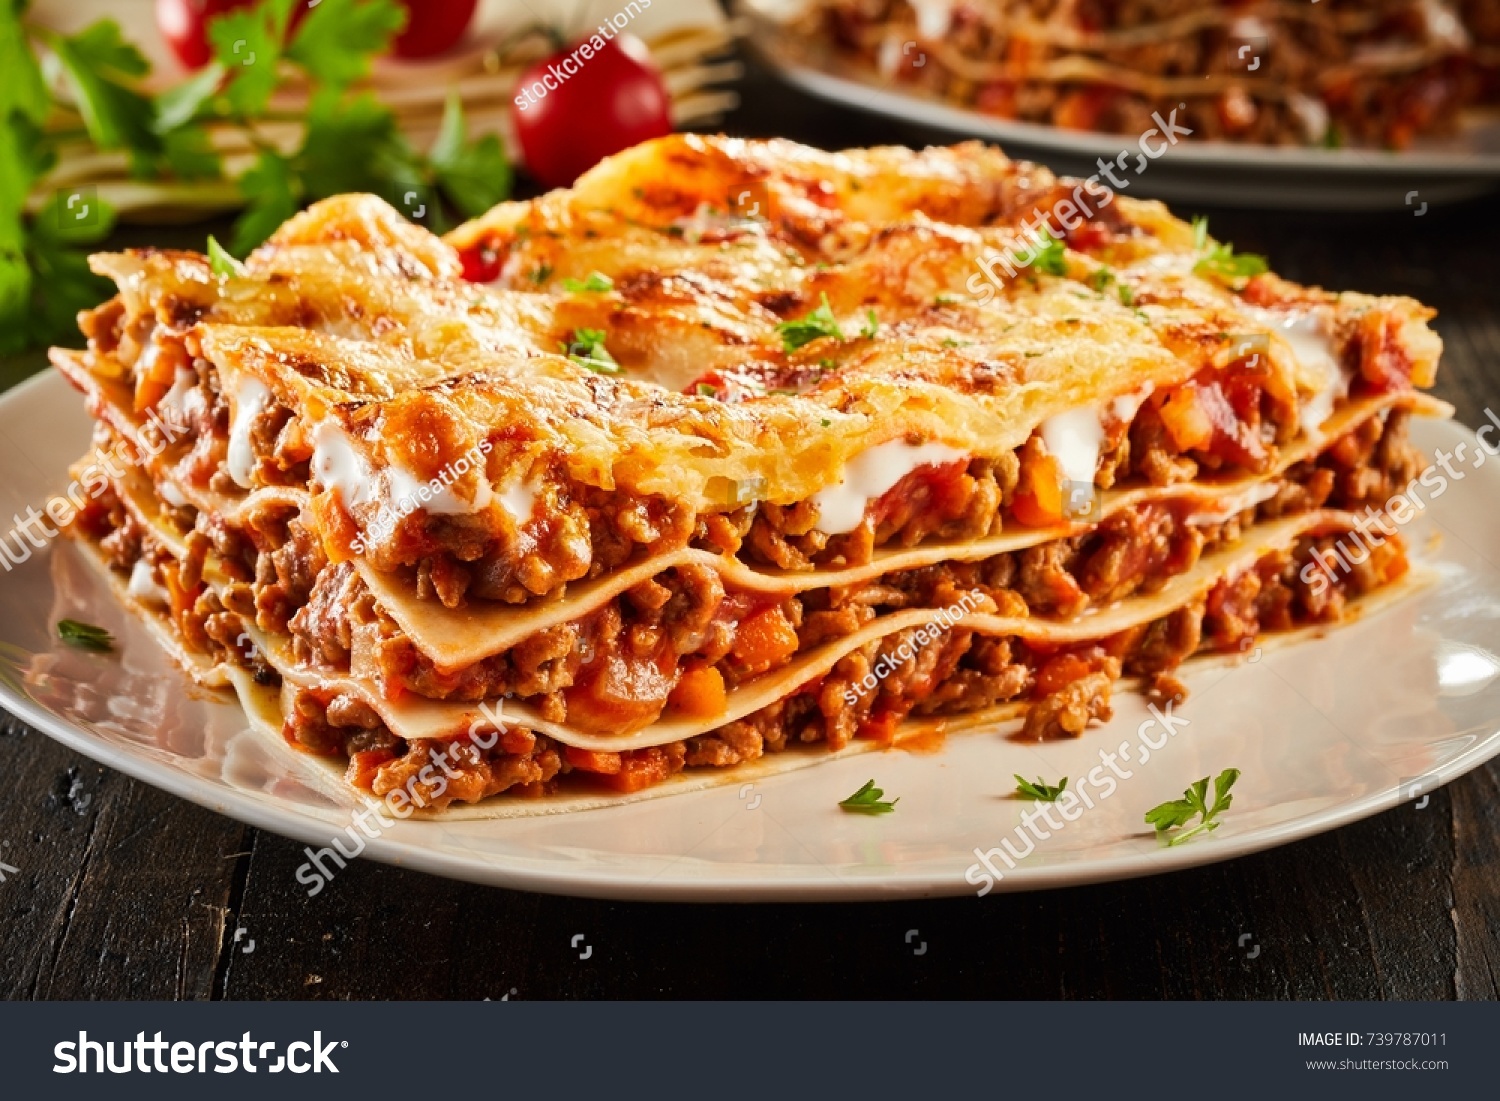 Portion of succulent ground beef lasagne topped with melted cheese and garnished with fresh parsley served on a plate in a close up view for a menu #739787011